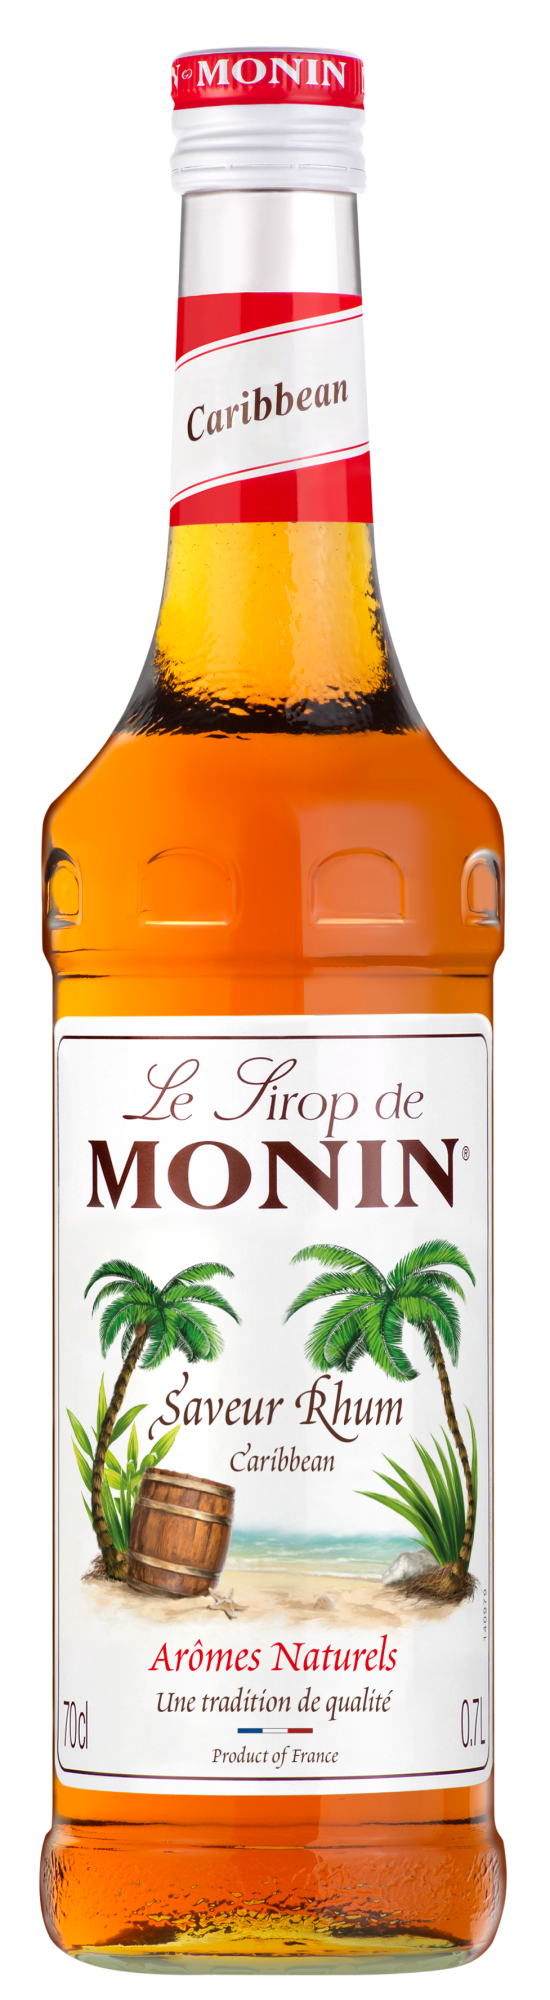 Buy MONIN Caribbean Syrup. It offers a rich, slightly smokey, caramel flavour notes and aromas.